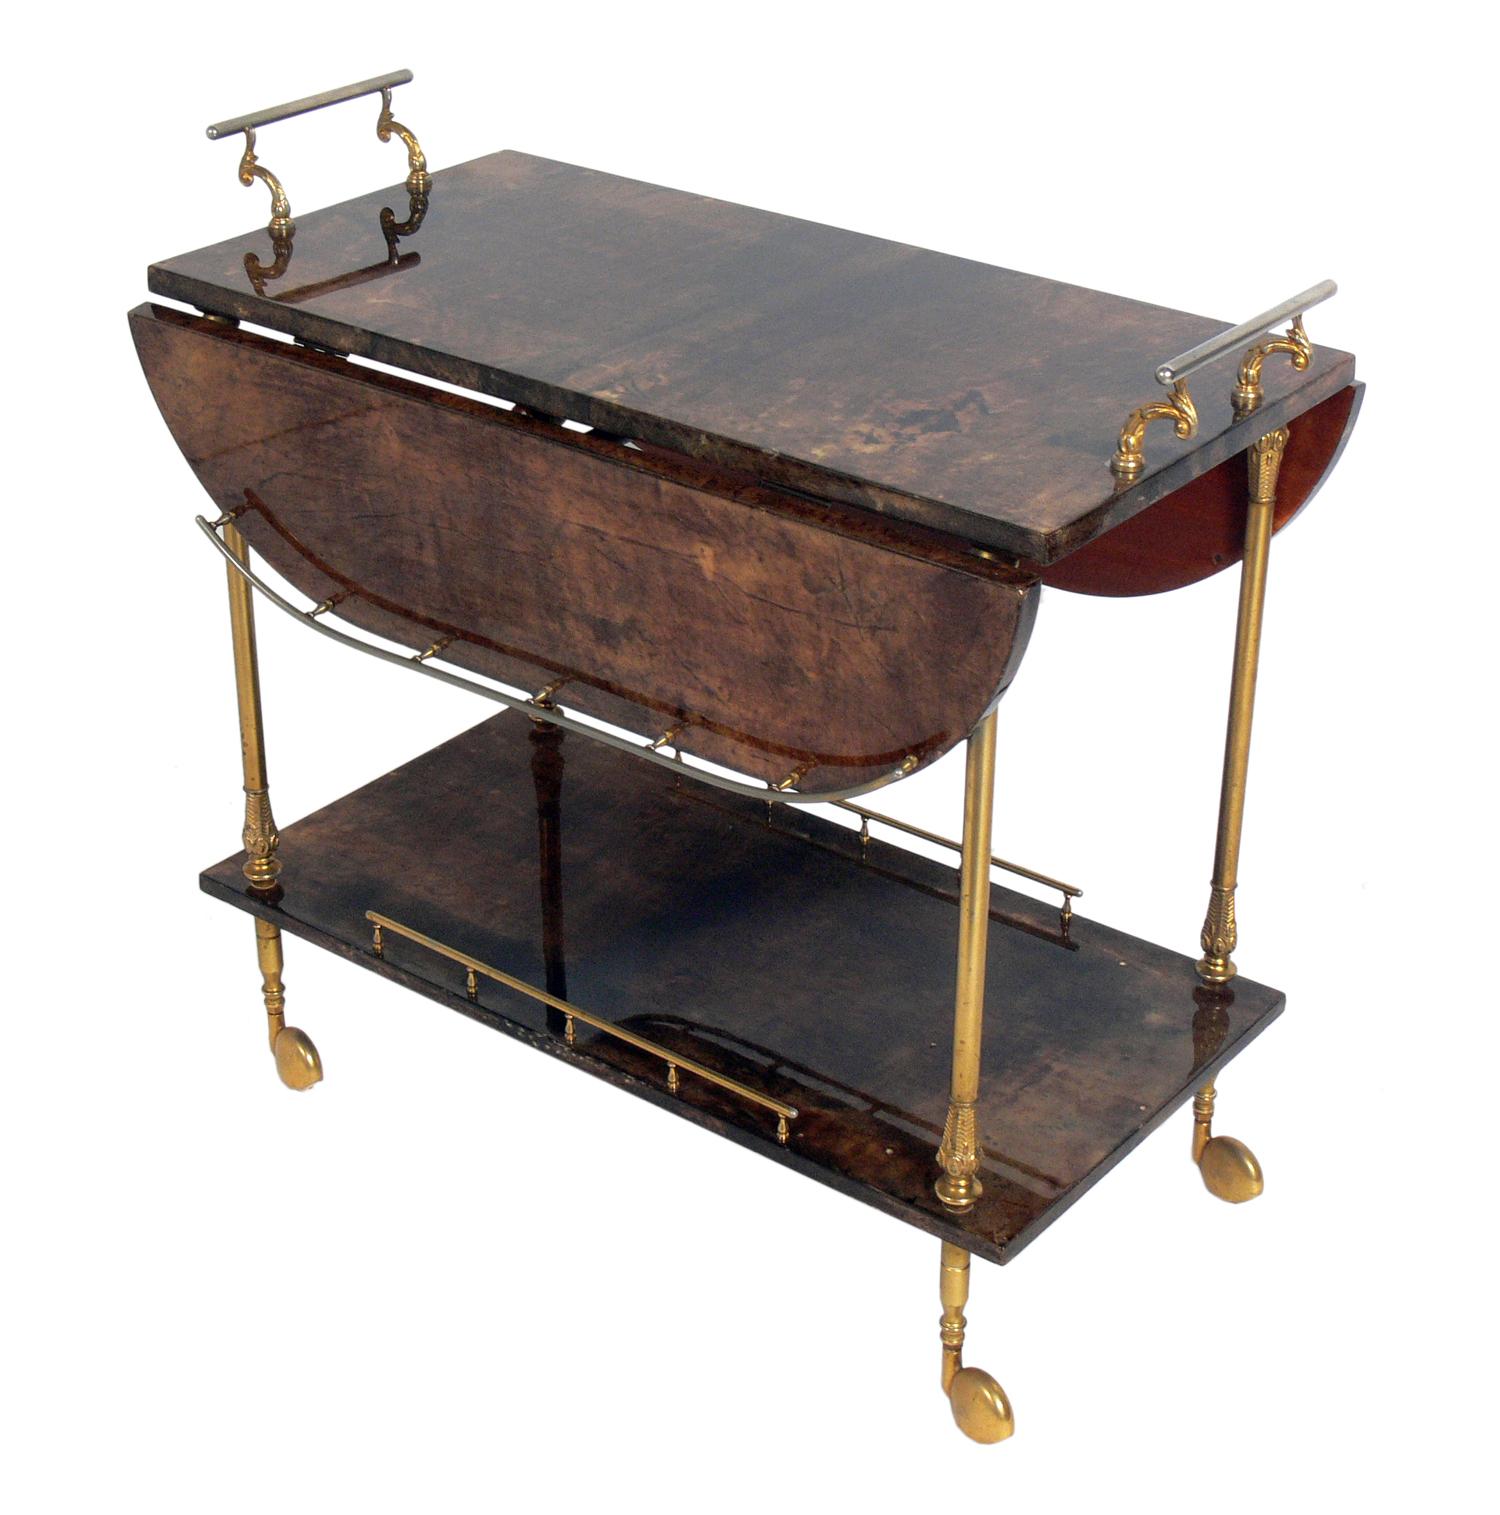 Aldo Tura Goatskin or parchment bar or tea cart, Italy, circa 1960s. Constructed of thickly lacquered goatskin or parchment and gilt metal hardware. Perfect bar or serving cart, or as rolling storage in an office.